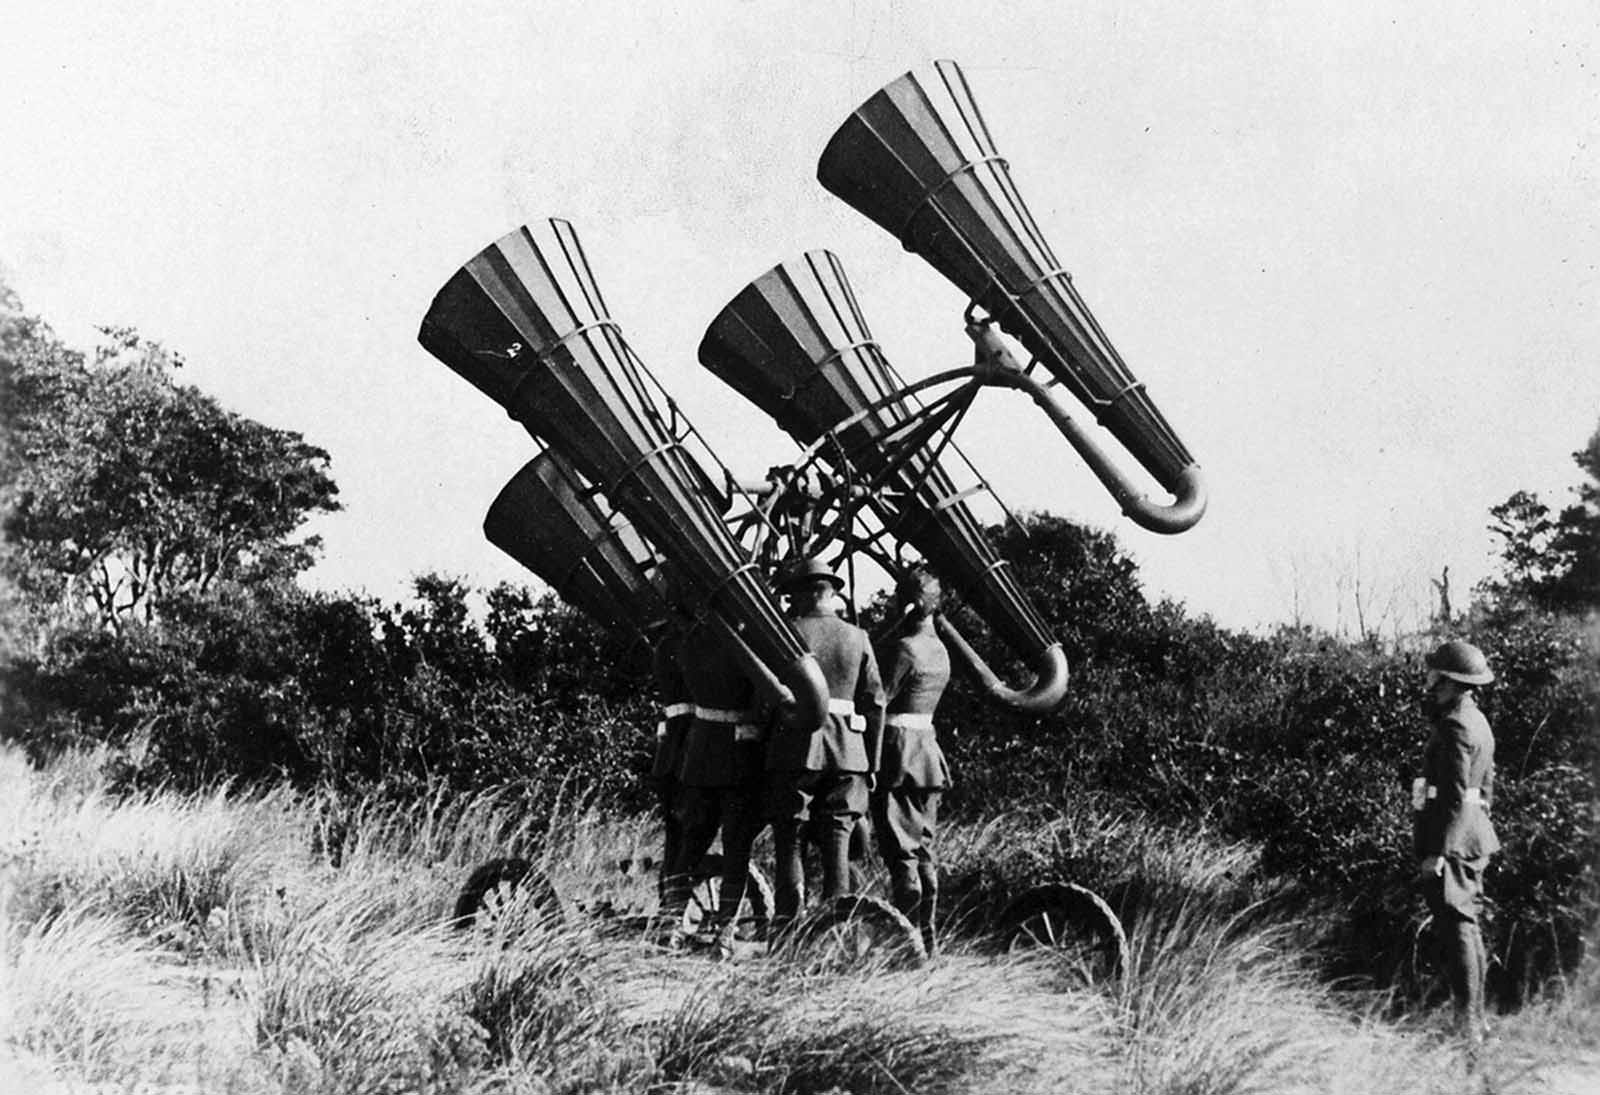 American troops using a newly-developed acoustic locator, mounted on a wheeled platform. The large horns amplified distant sounds, monitored through headphones worn by a crew member, who could direct the platform to move and pinpoint distant enemy aircraft. Development of passive acoustic location accelerated during World War I, later surpassed by the development of radar in the 1940s